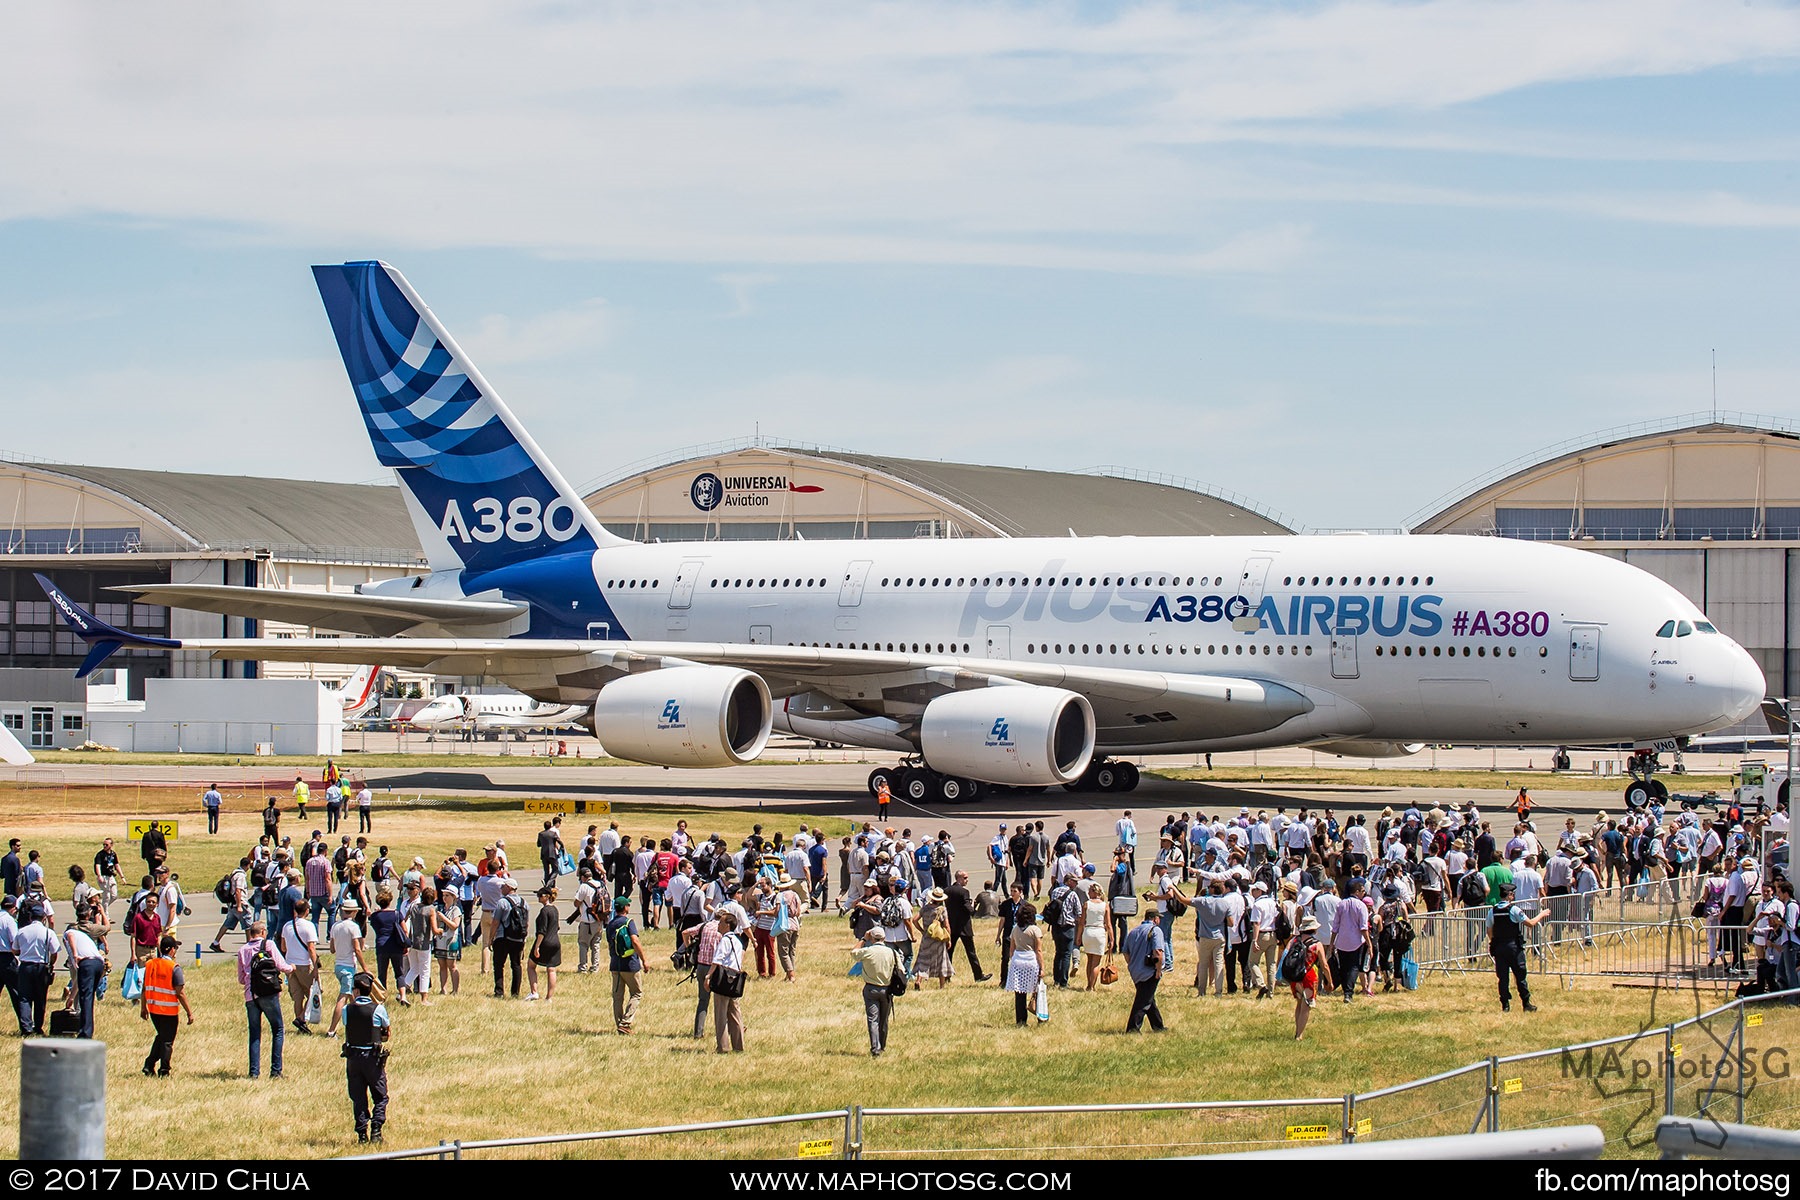 1. Airbus unveiled a new version of its super jumbo A380 with a host of upgrades. The A380plus is an efficient way to offer even better economics and improved operational performance at the same time. Here, the crowd gathers as the A380plus is being towed from the Static Display Area.